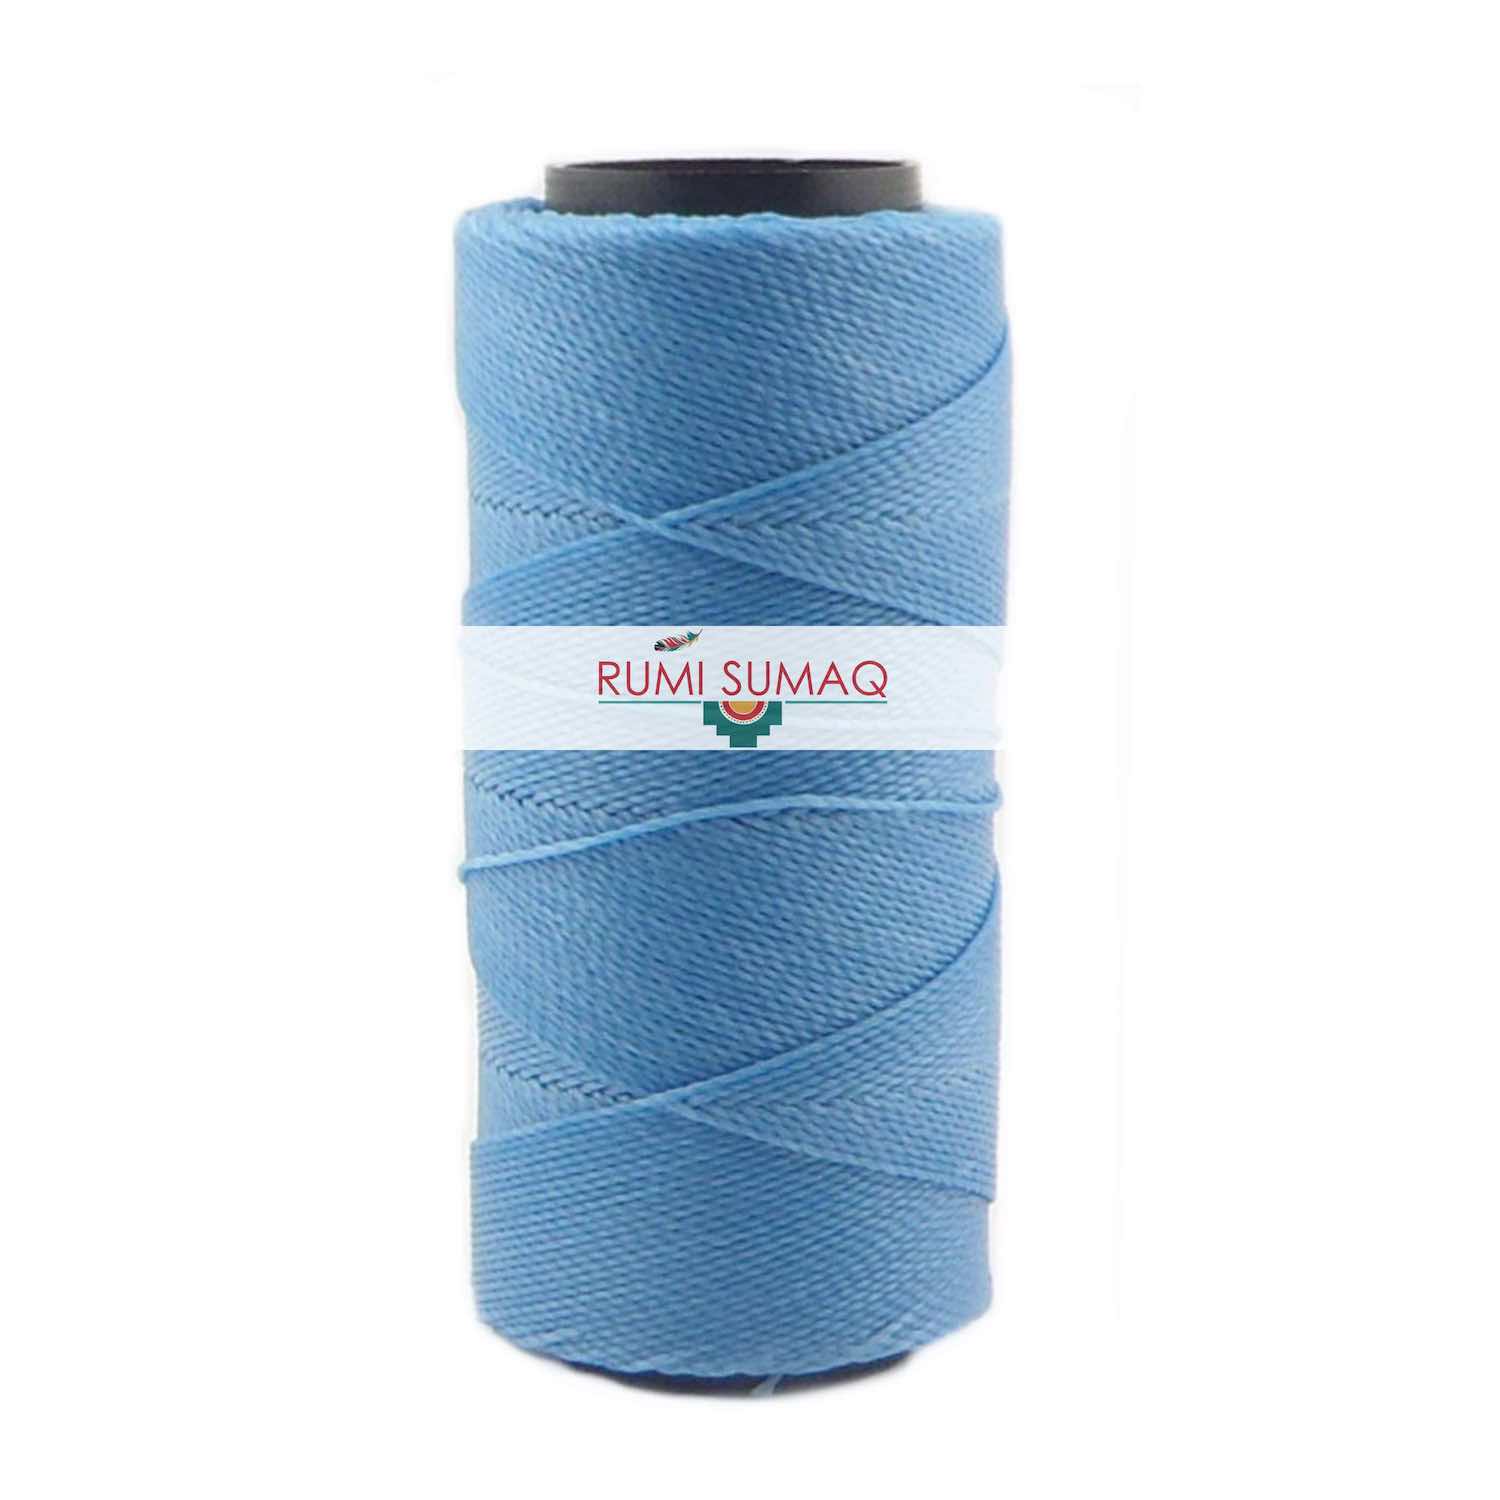 Settanyl 04-070 Caribbean Blue 1mm waxed polyester cord available at Rumi Sumaq. Waxed cord macrame jewelry, friendship bracelets, beading, quilting, leather working